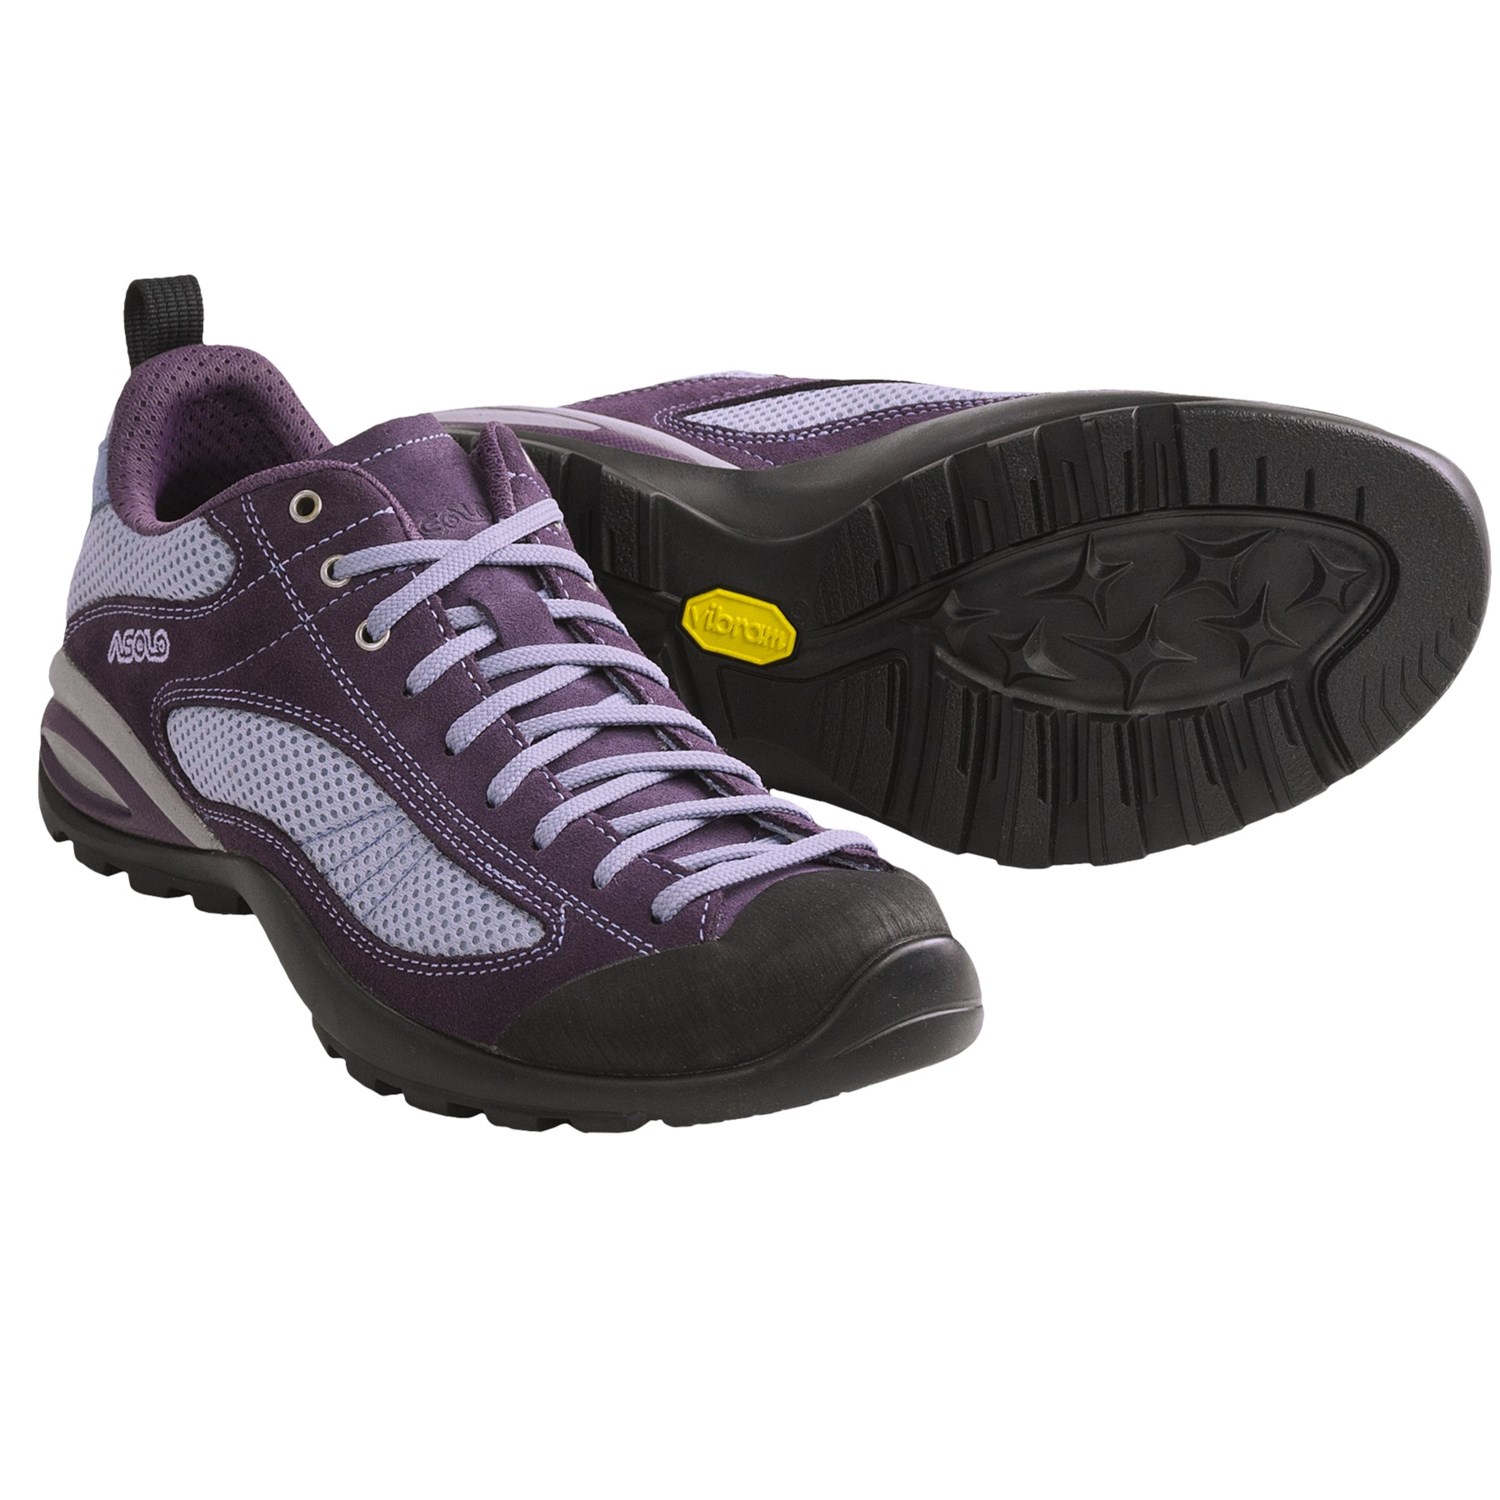 Asolo Sunset Hiking Shoes (For Women) in Dark PlumLilac